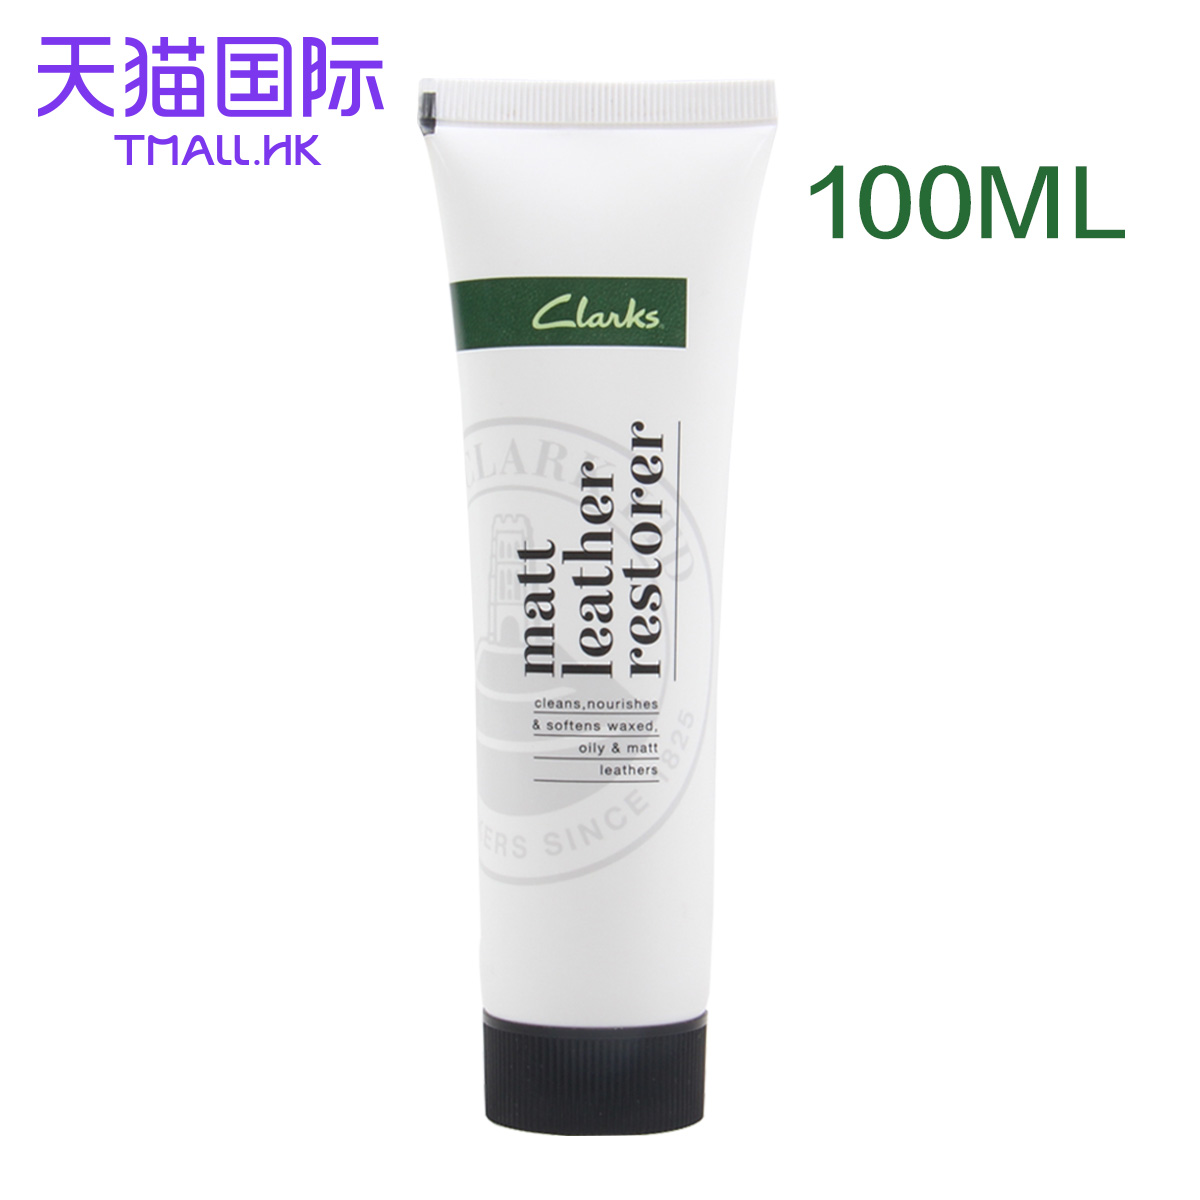 clarks leather cleaner